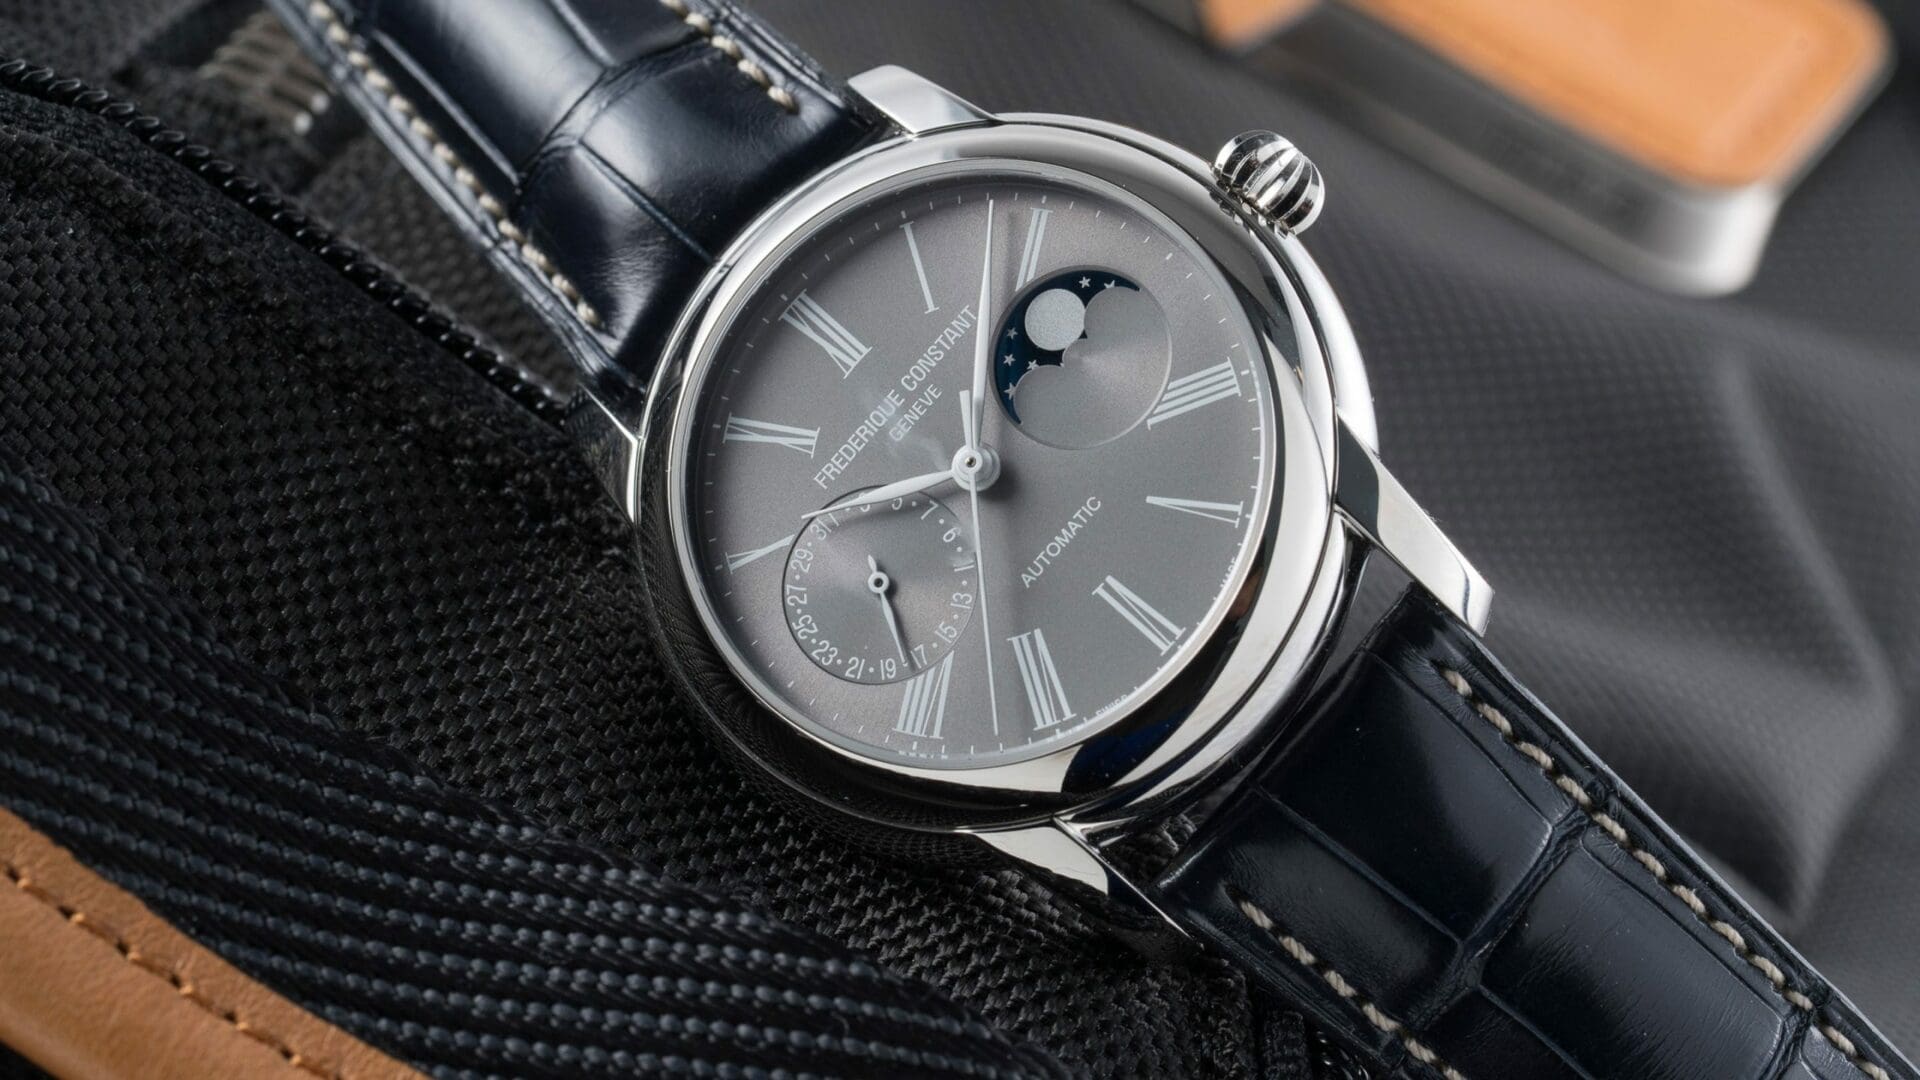 “Watch & Act!” Auction Item – Lot 15: A moon dance with Frederique Constant Classic Moonphase Manufacture